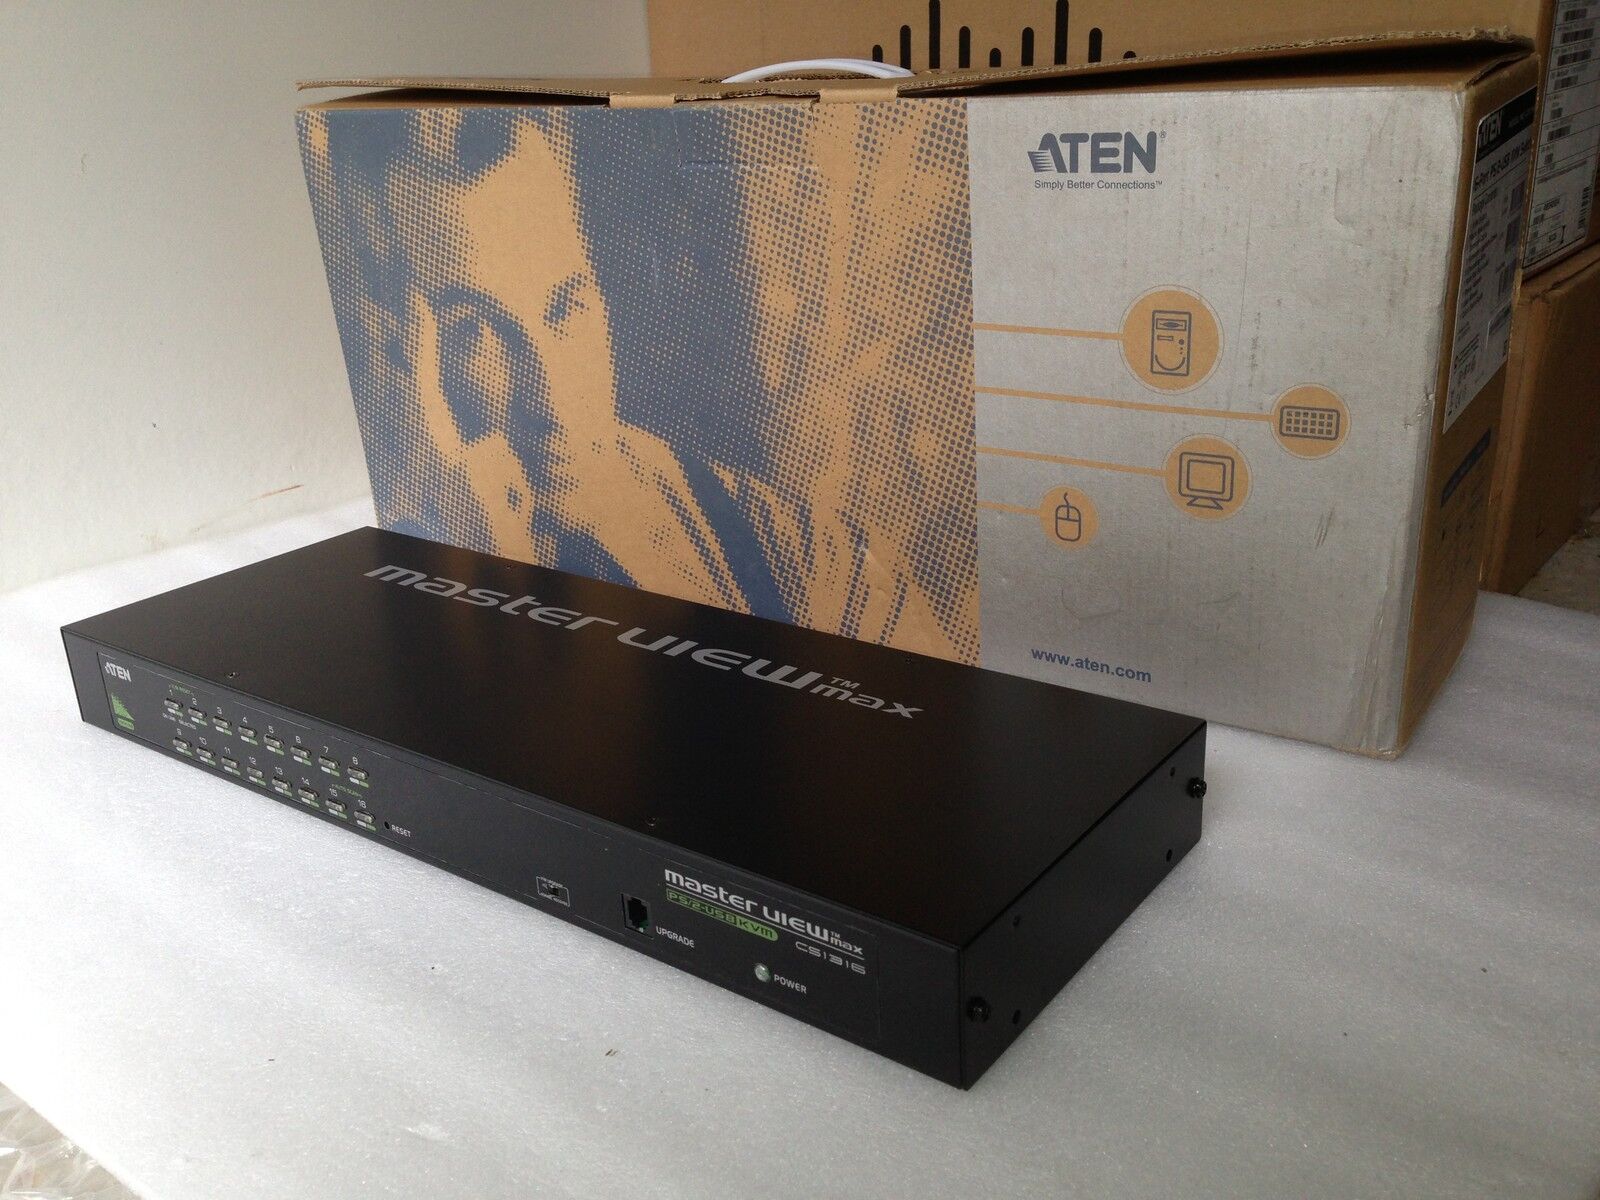 ATEN Master View max CS1316 PS/2-USB KVM  90 Day's Warranty. Real time listing.